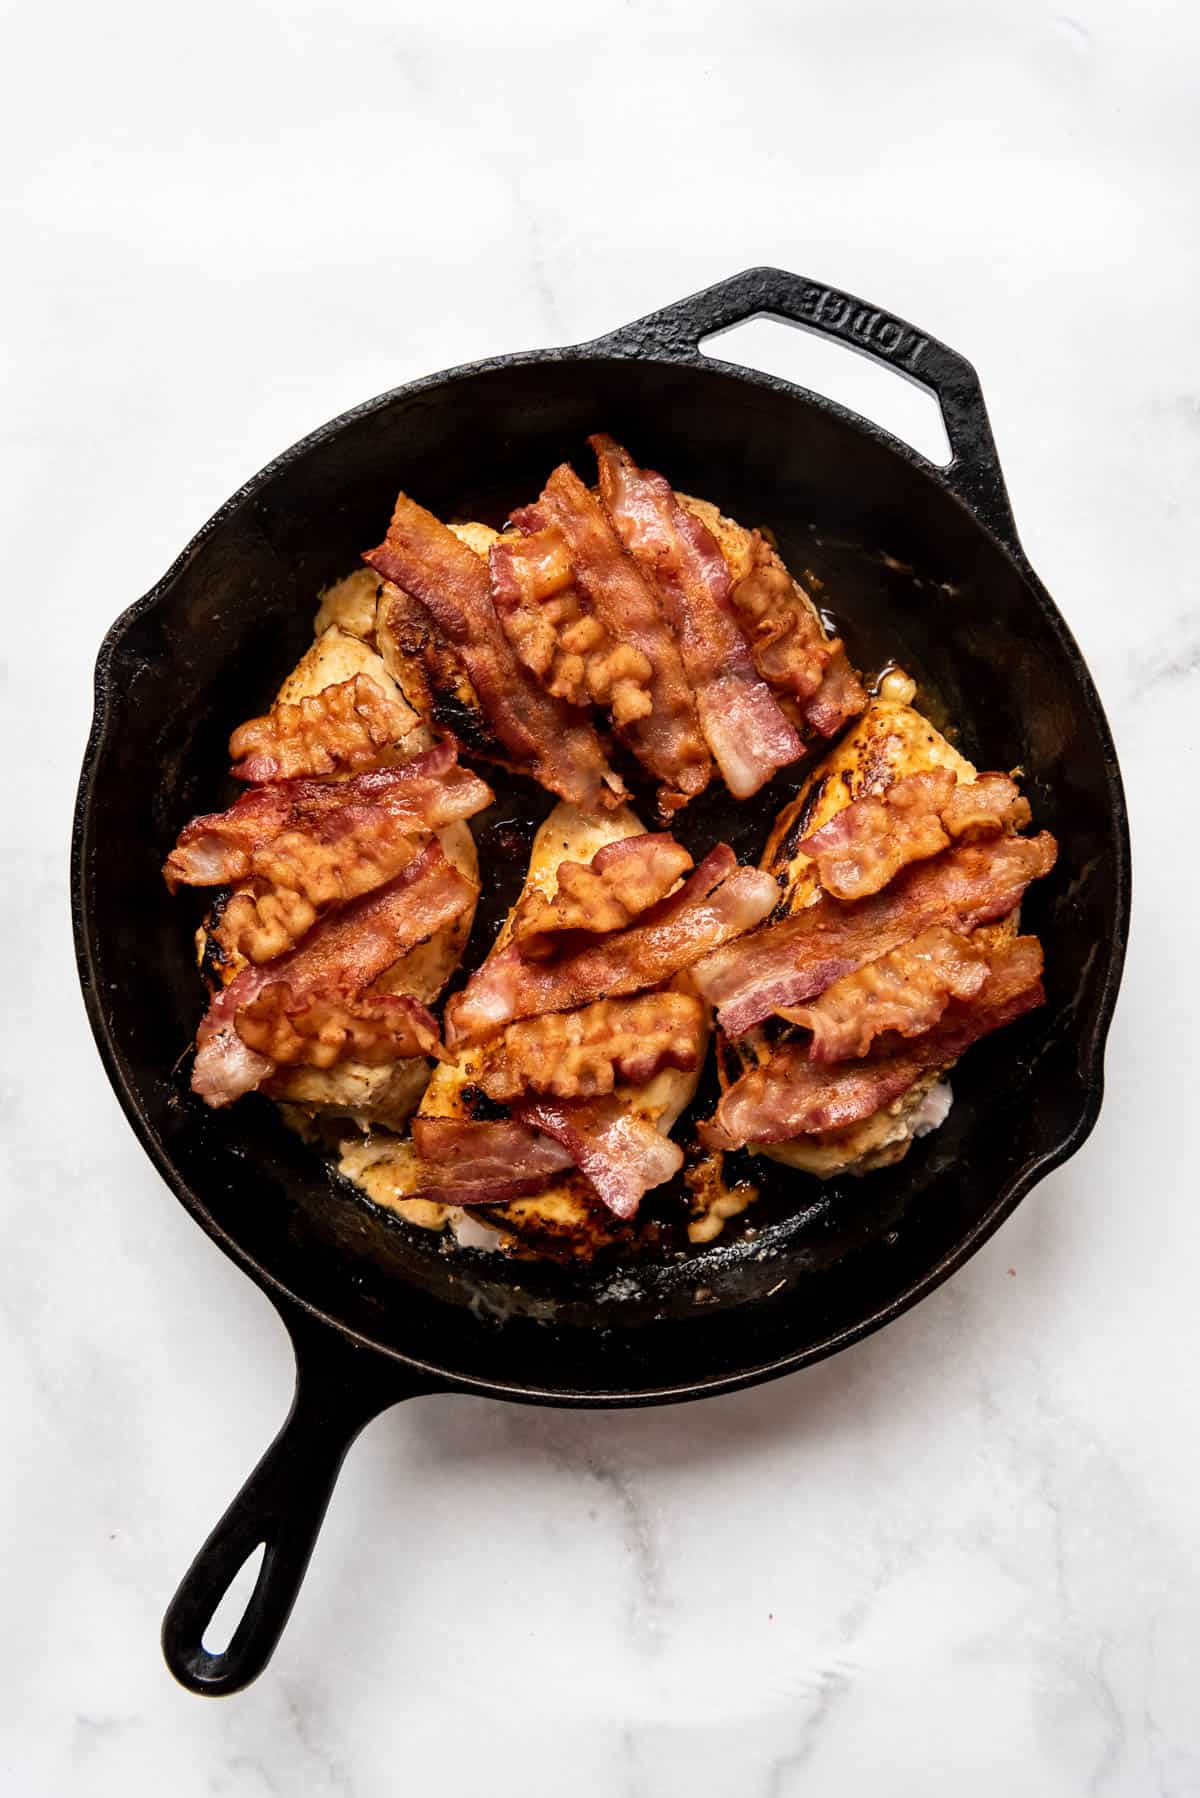 Adding slices of crispy cooked bacon on top of chicken breasts in a cast iron skillet.